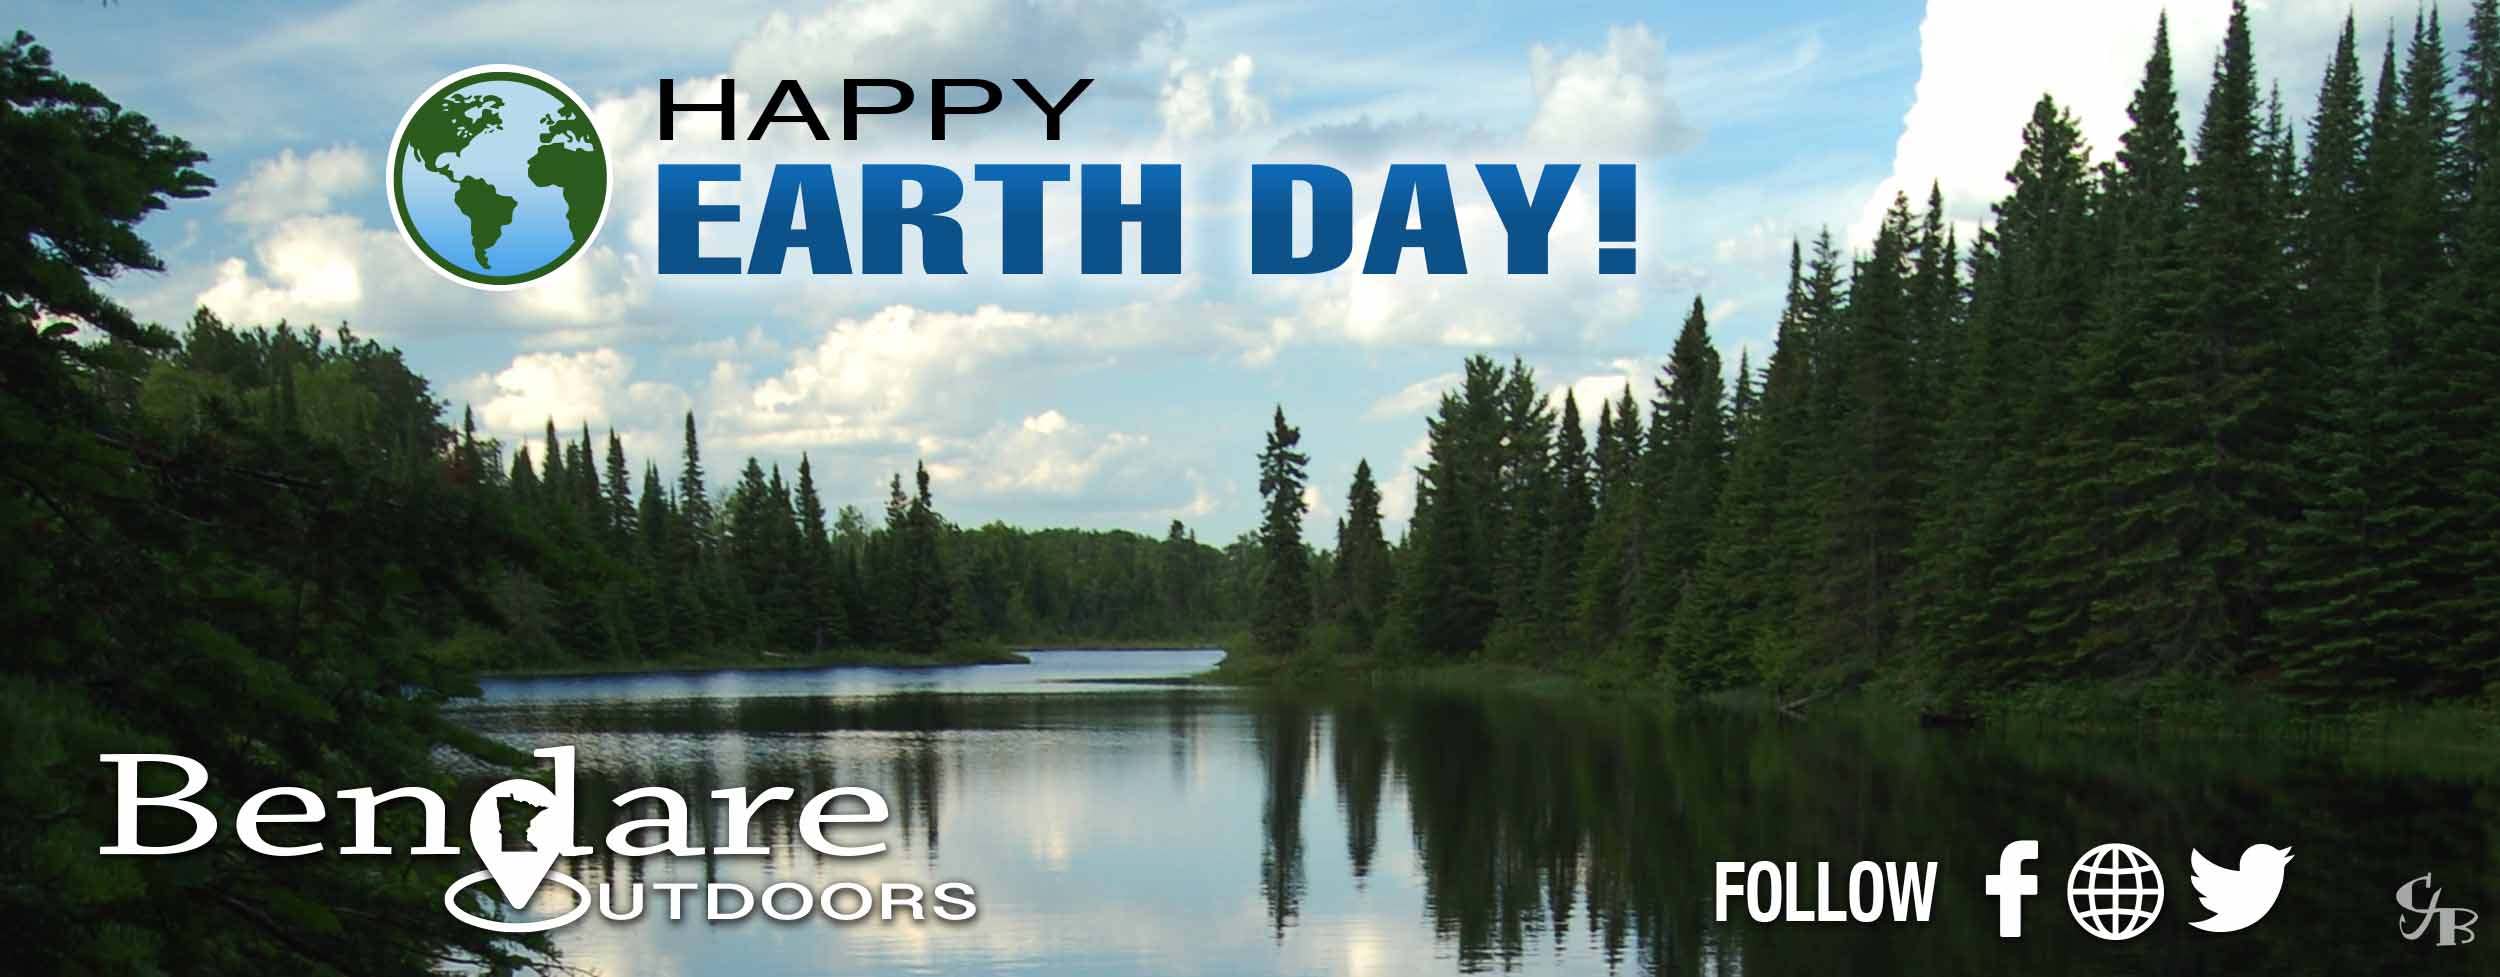 Happy Earth Day from Bendare Outdoors